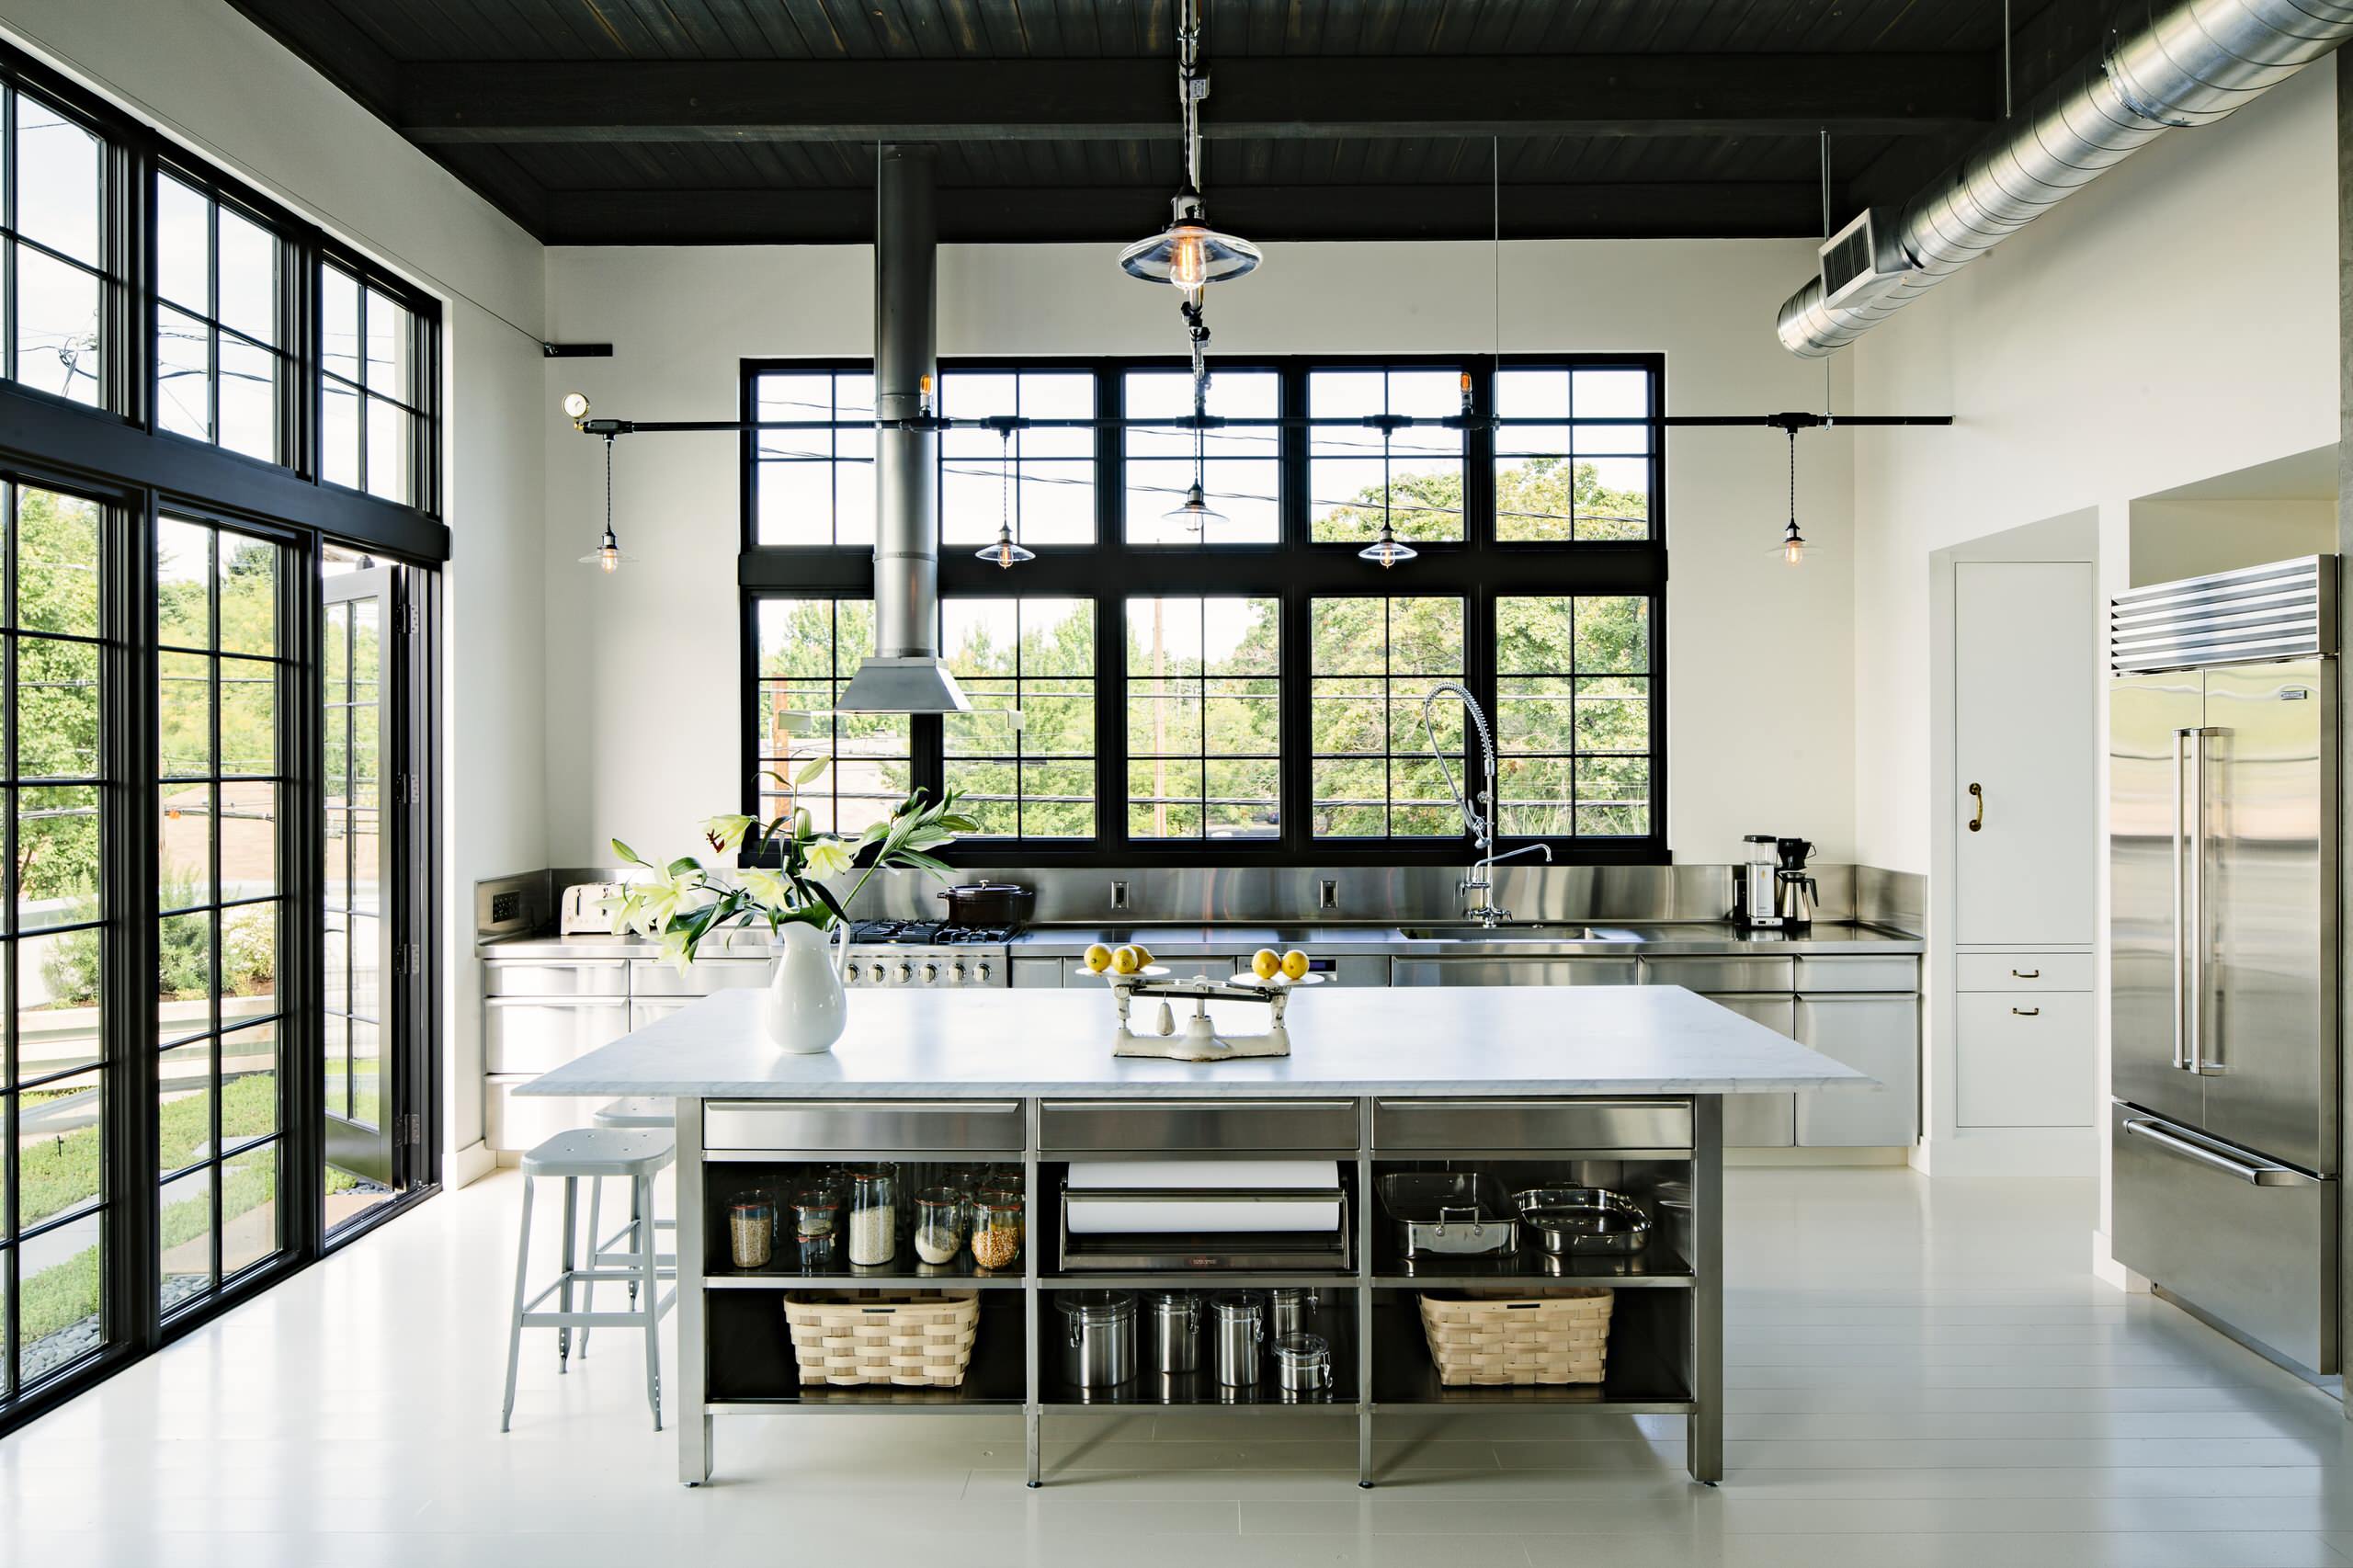 75 Industrial Home Design | Houzz Ideas You\'ll Love - October ...